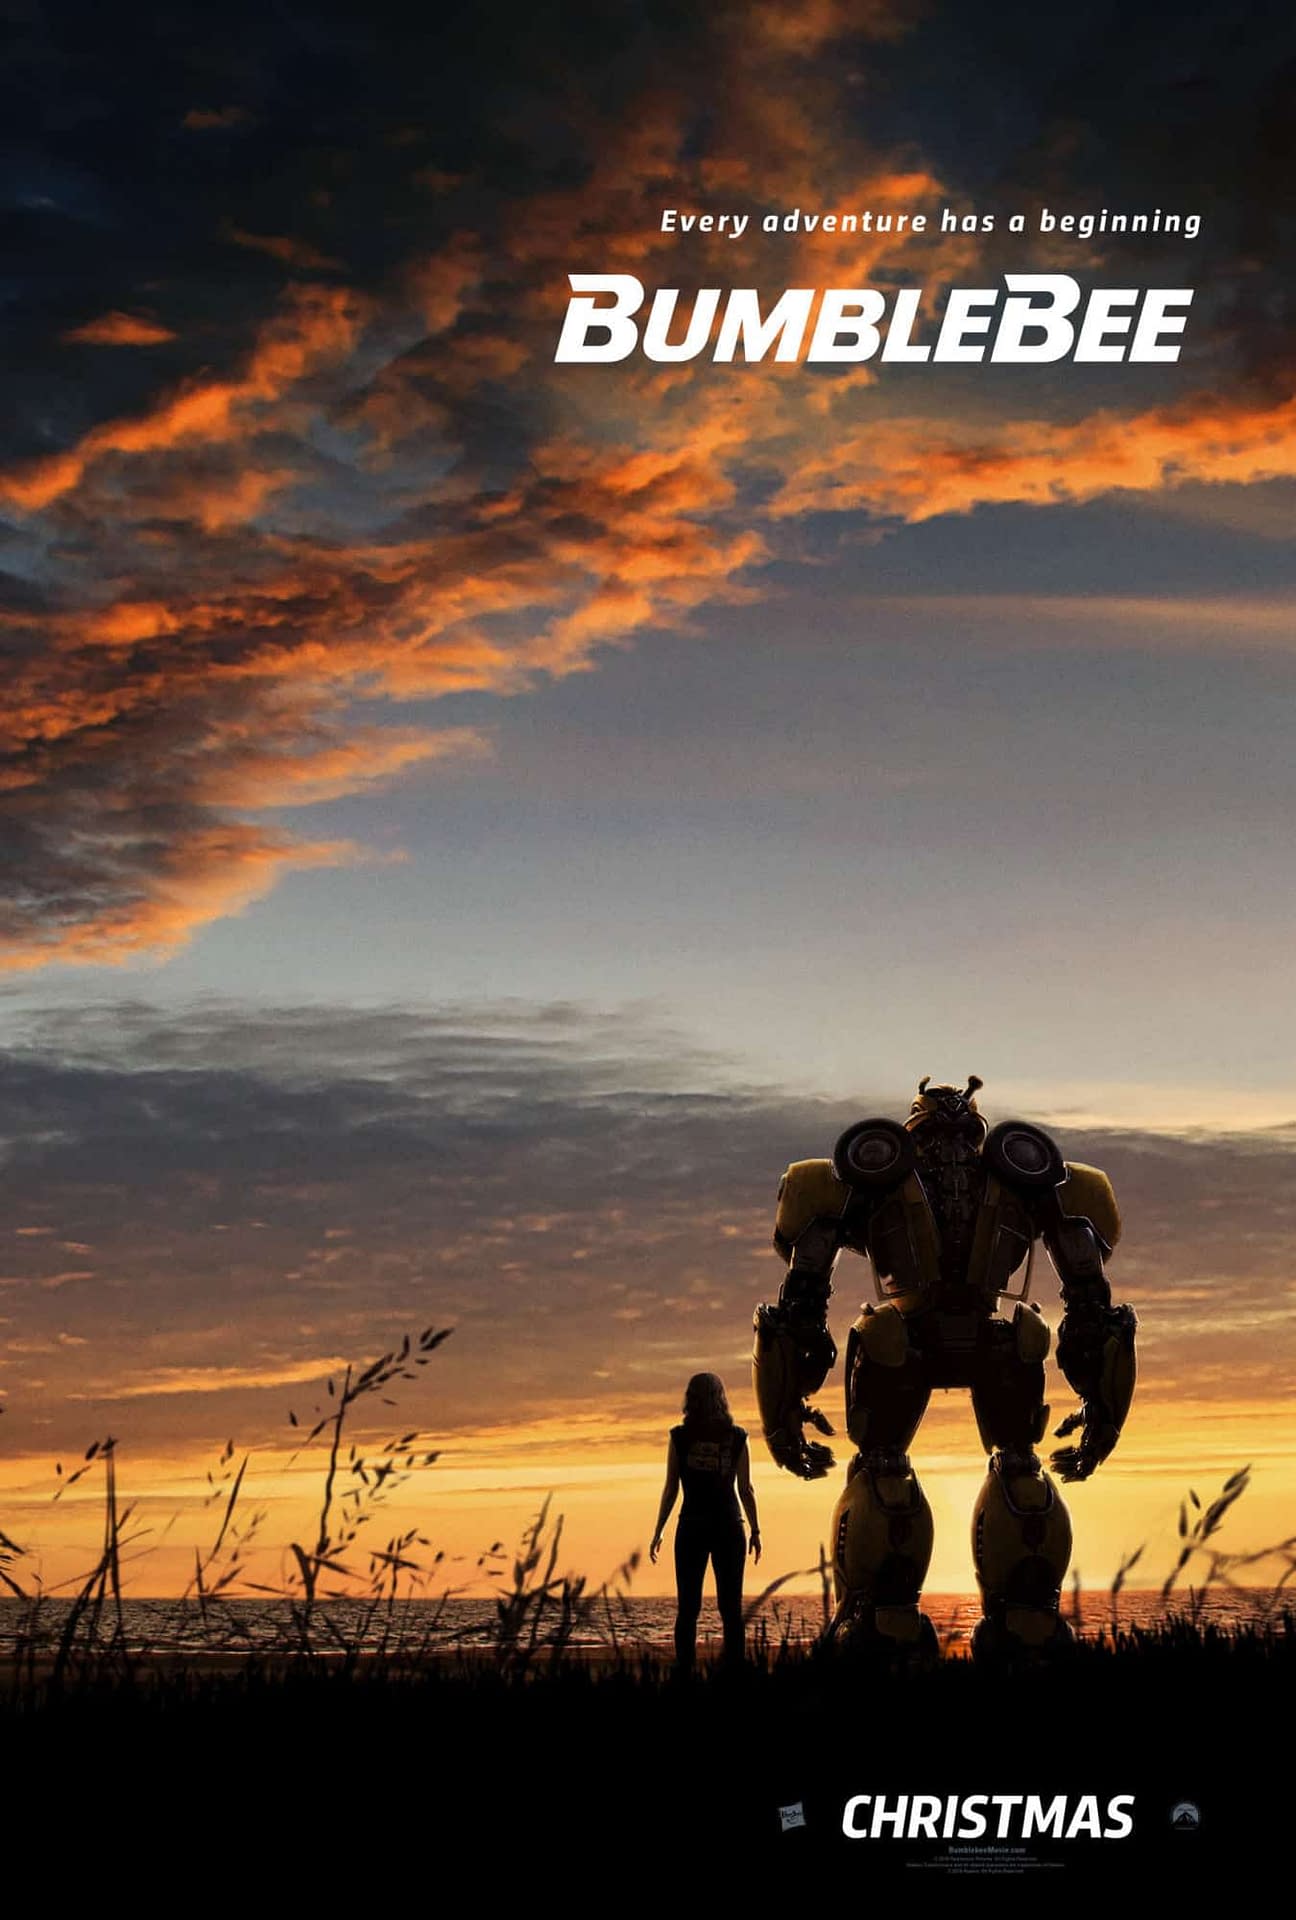 The First Trailer and Poster for Bumblebee Tease a Very Different Transformers Movie